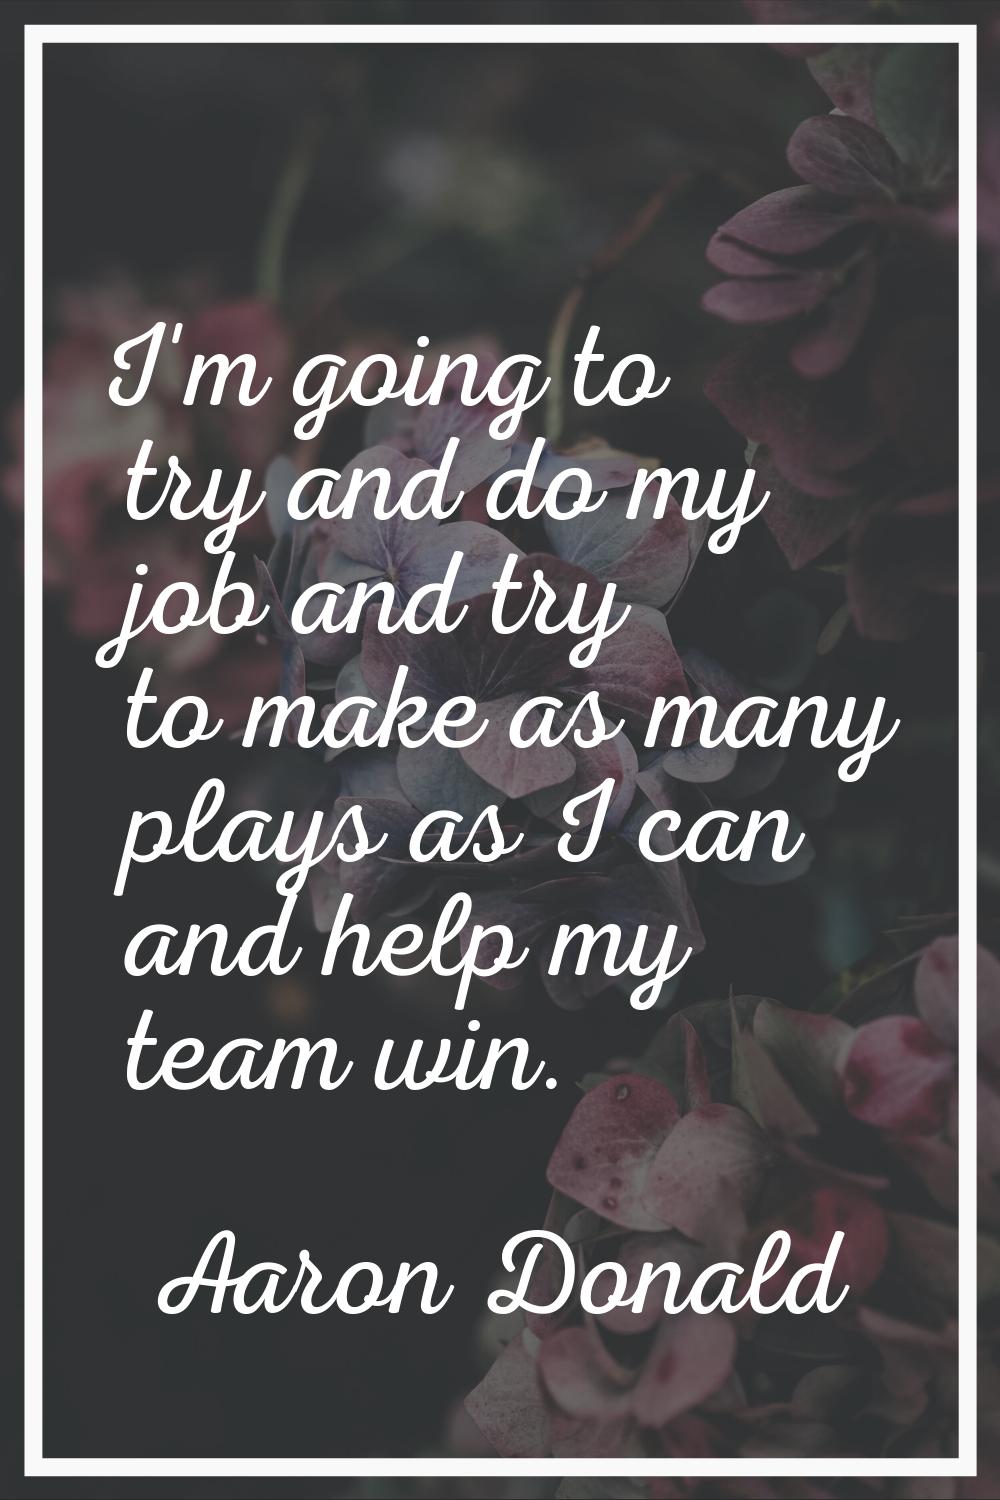 I'm going to try and do my job and try to make as many plays as I can and help my team win.